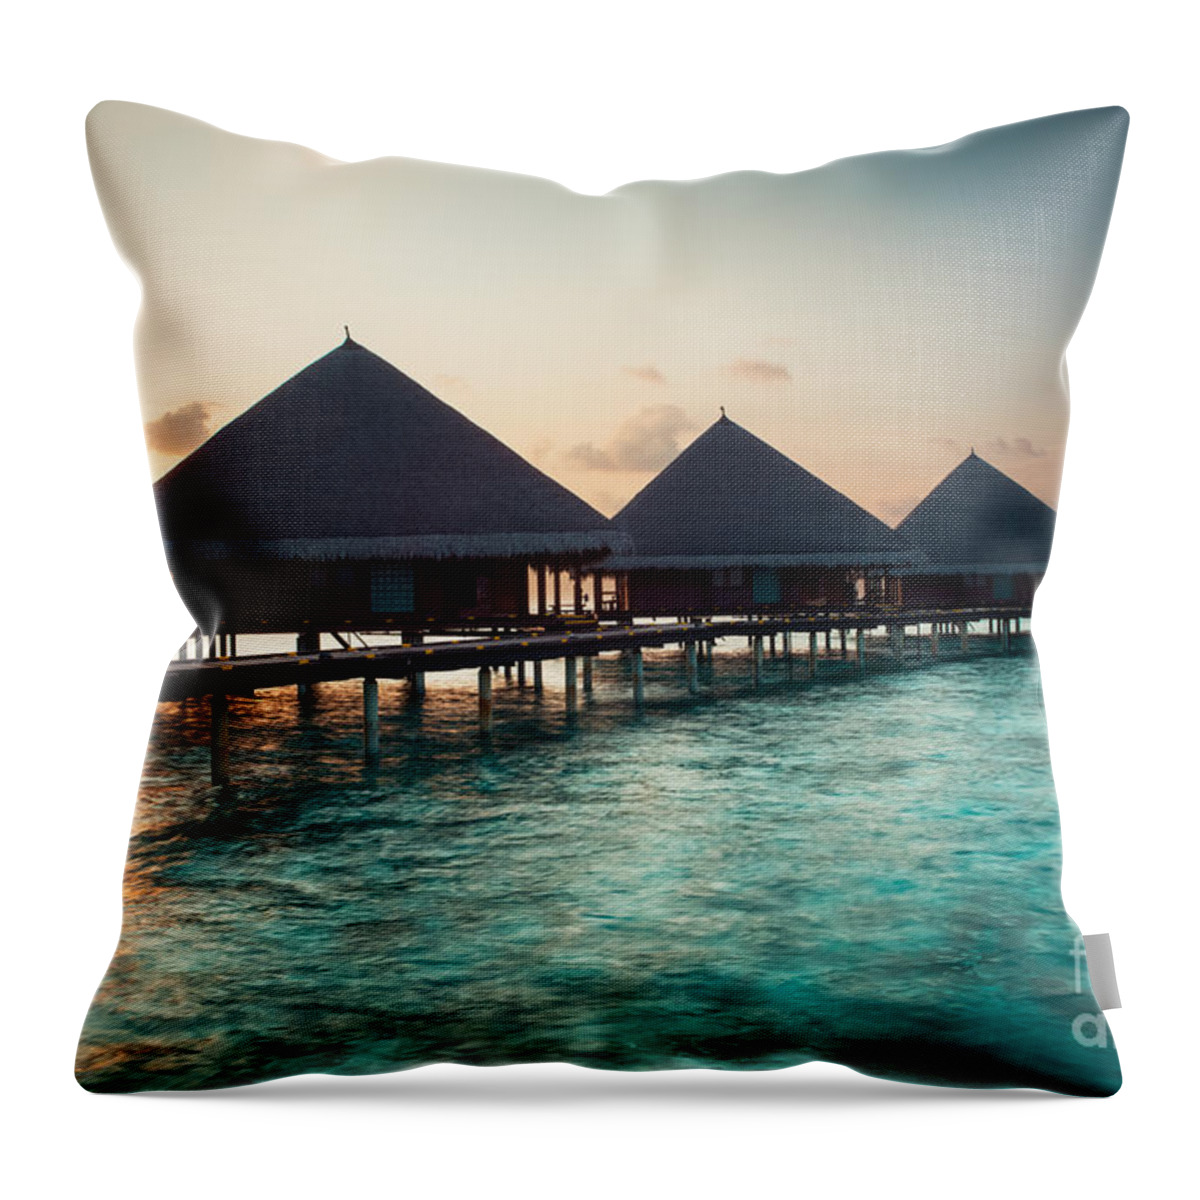 Amazing Throw Pillow featuring the photograph Waterbungalows At Sunset by Hannes Cmarits